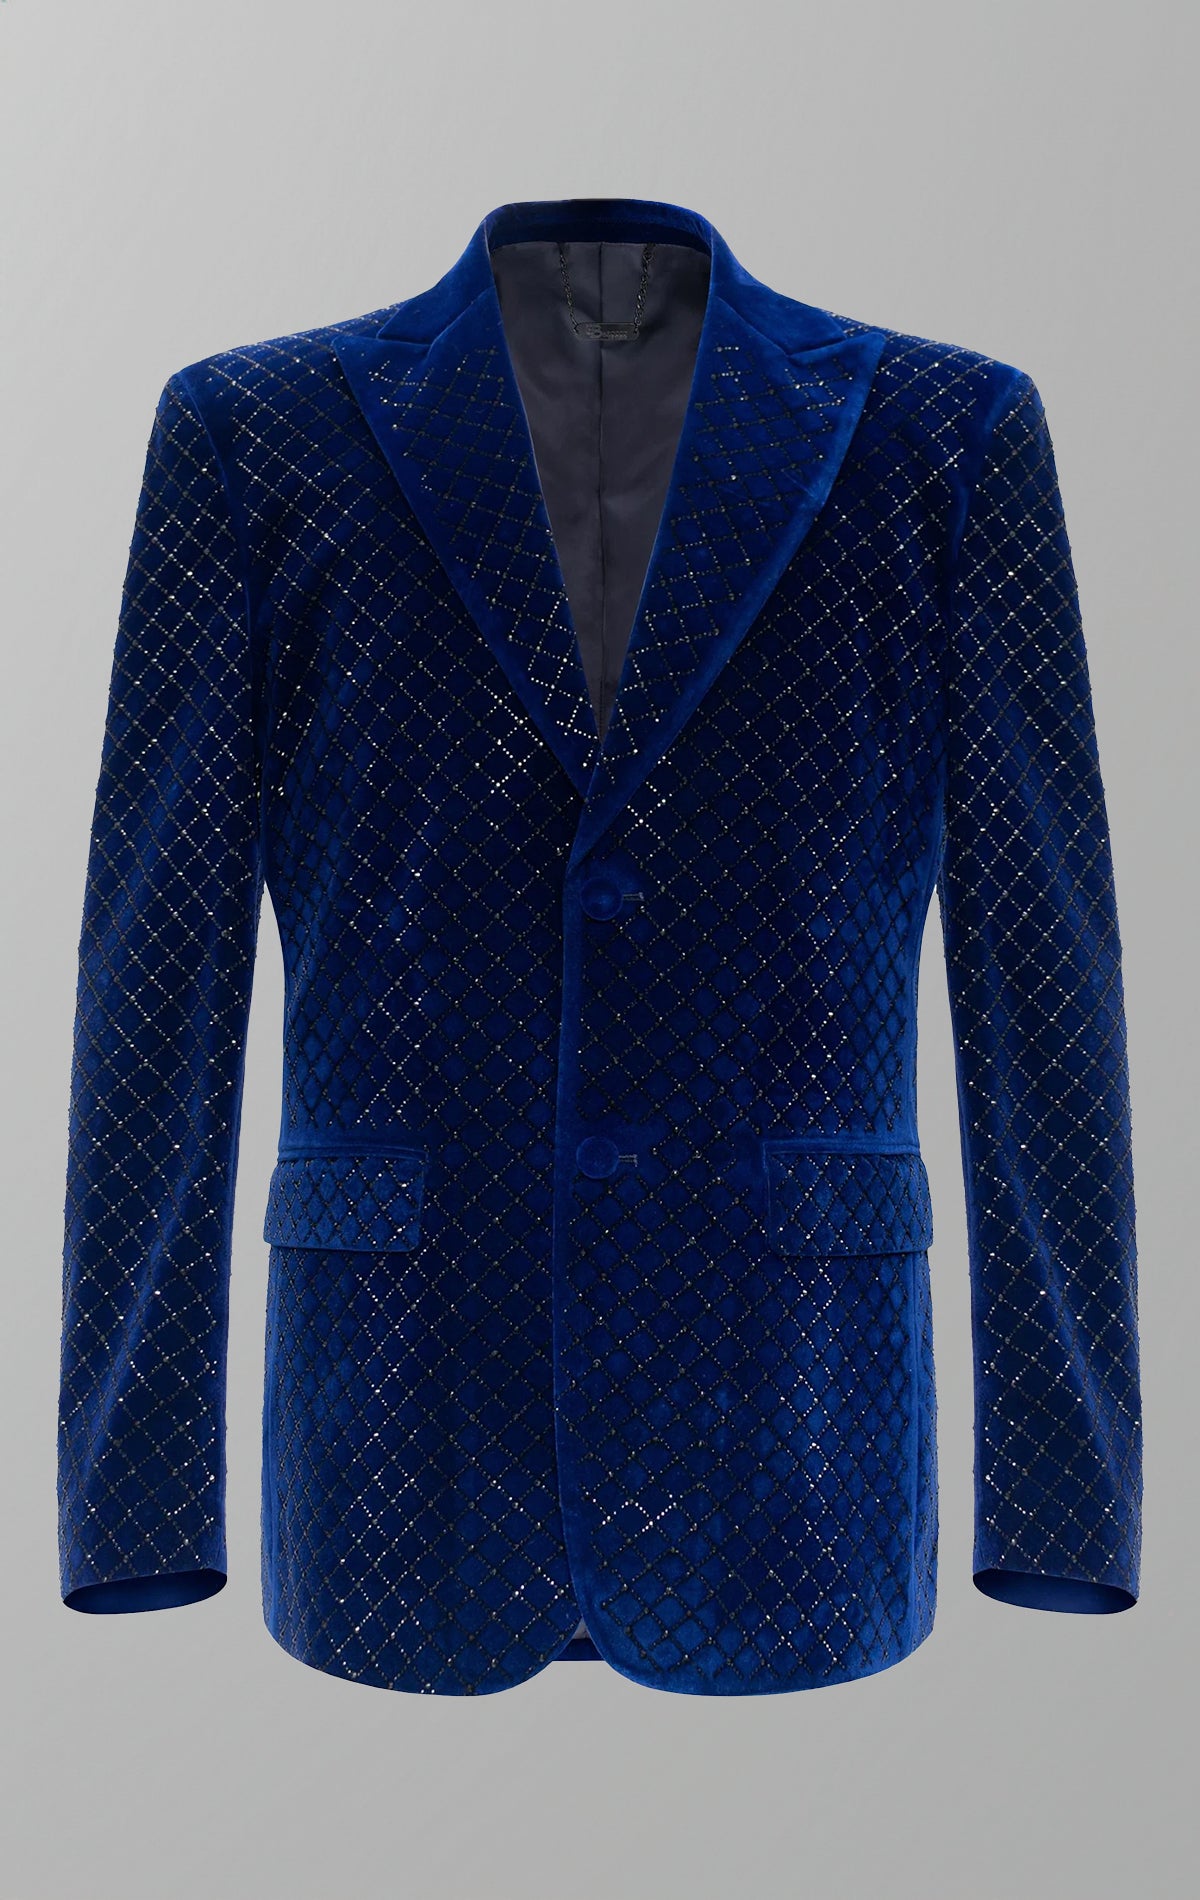 Close-up view of a sophisticated embellished blazer showcasing intricate details and luxurious textures, perfect for special occasions.